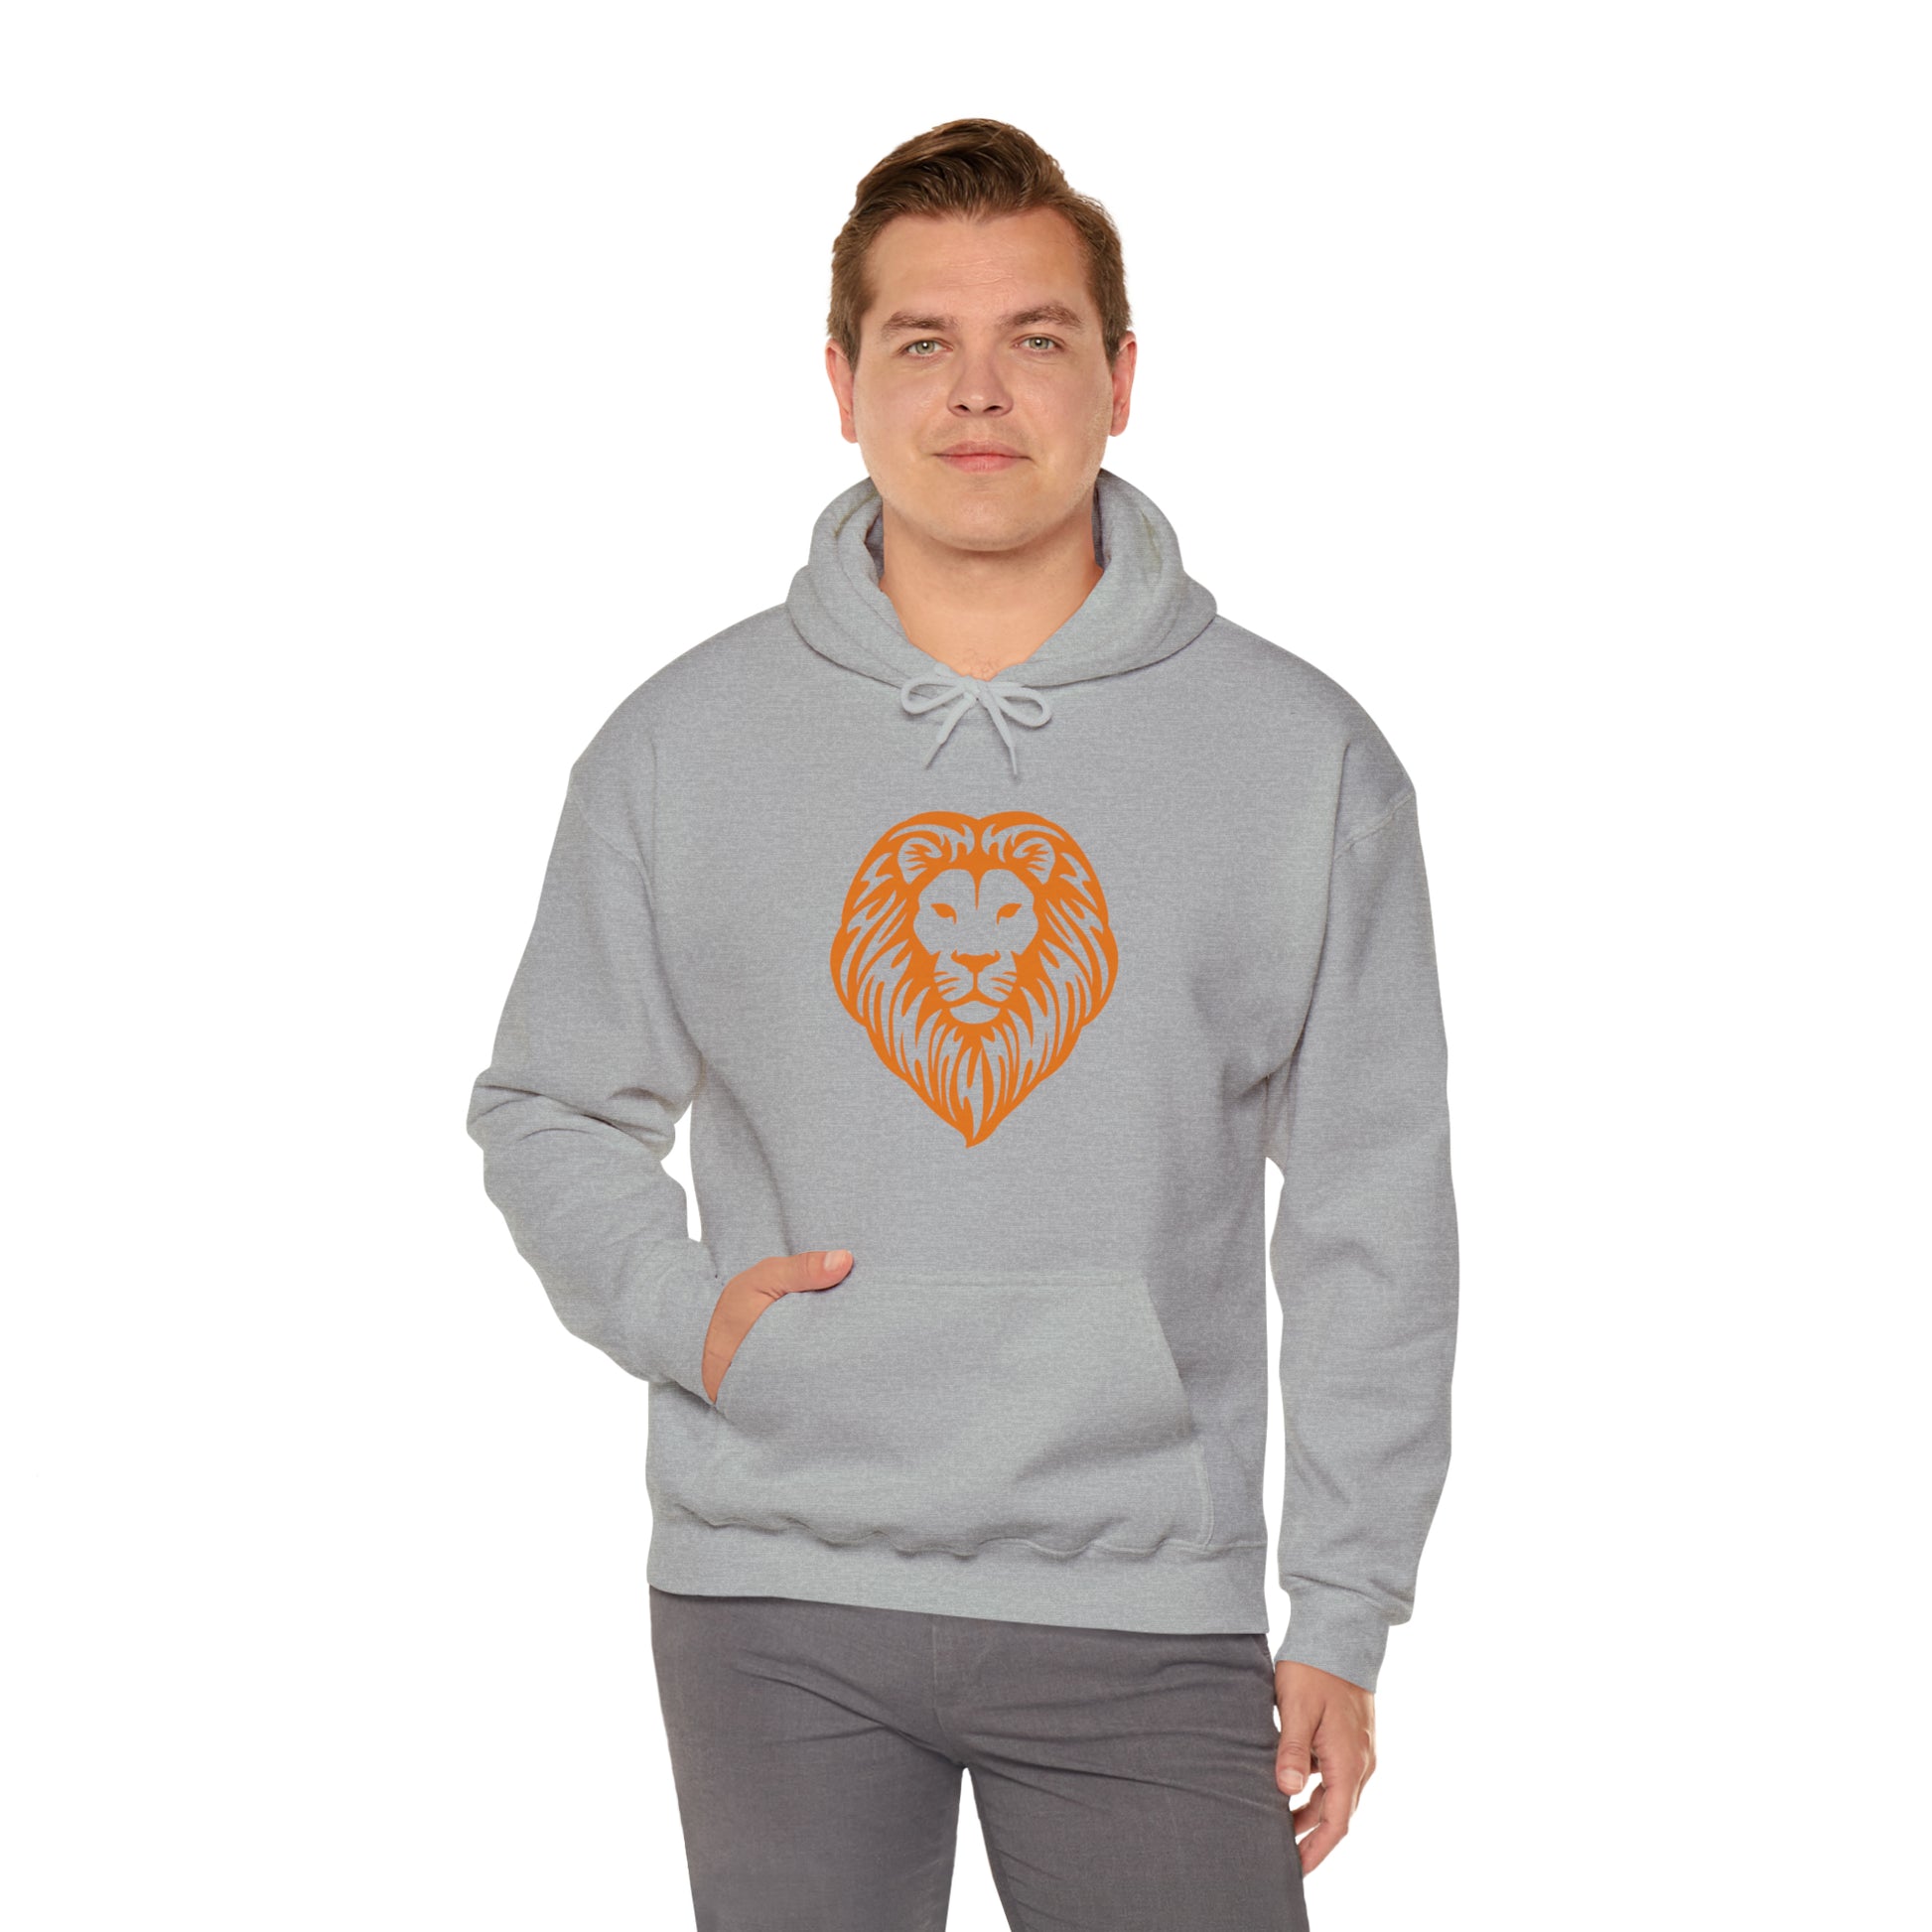 Brave Lion Hooded Sweatshirt - Friends of the Faith